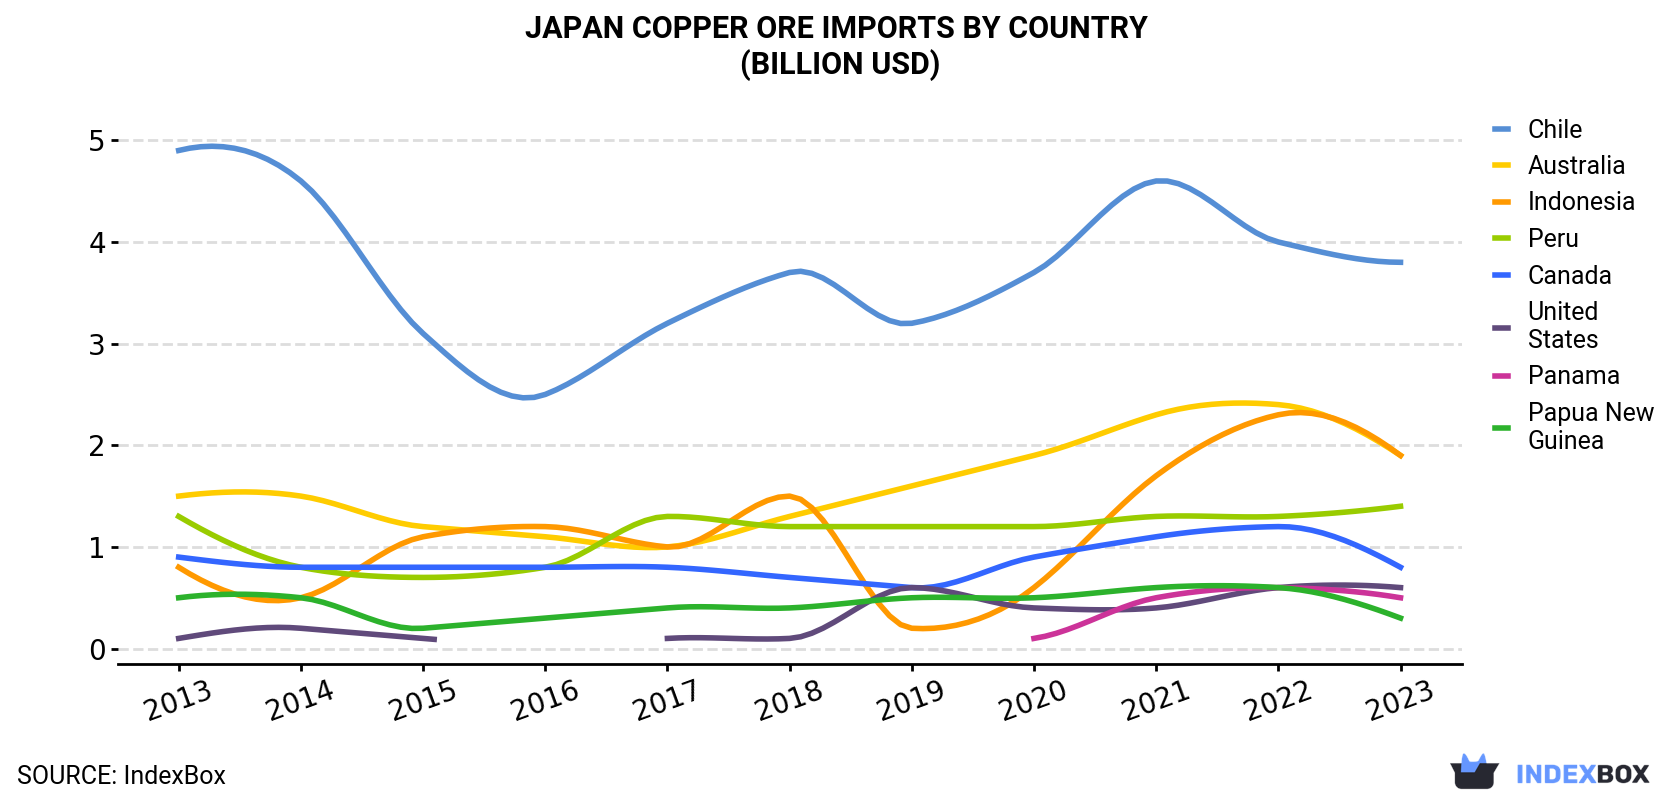 Japan Copper Ore Imports By Country (Billion USD)